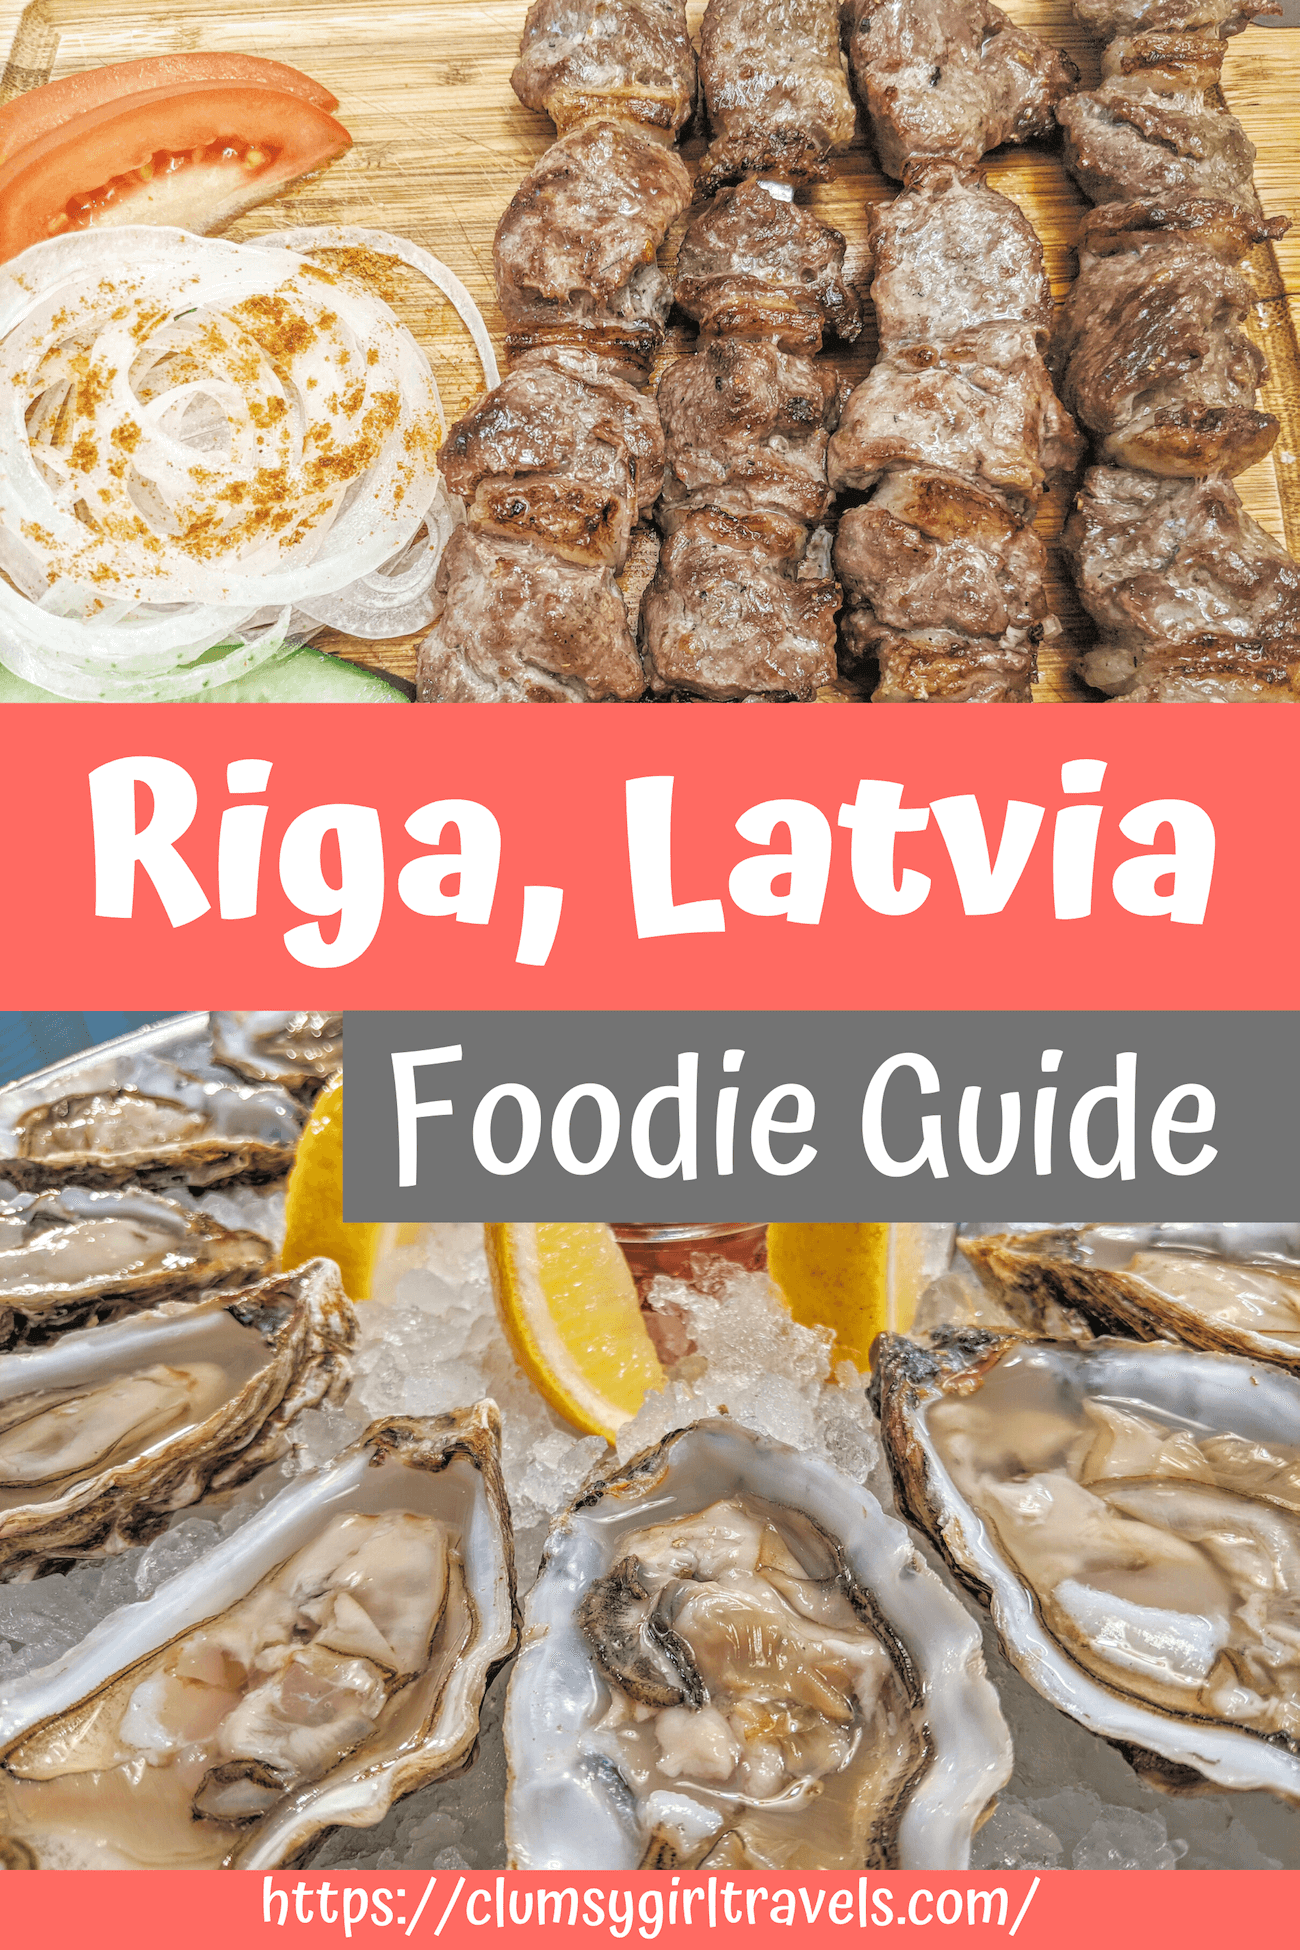 Are you looking for the best places to eat in Riga, Latvia? Look no further! This guide will help you decide where to eat in Riga, Latvia's capital.